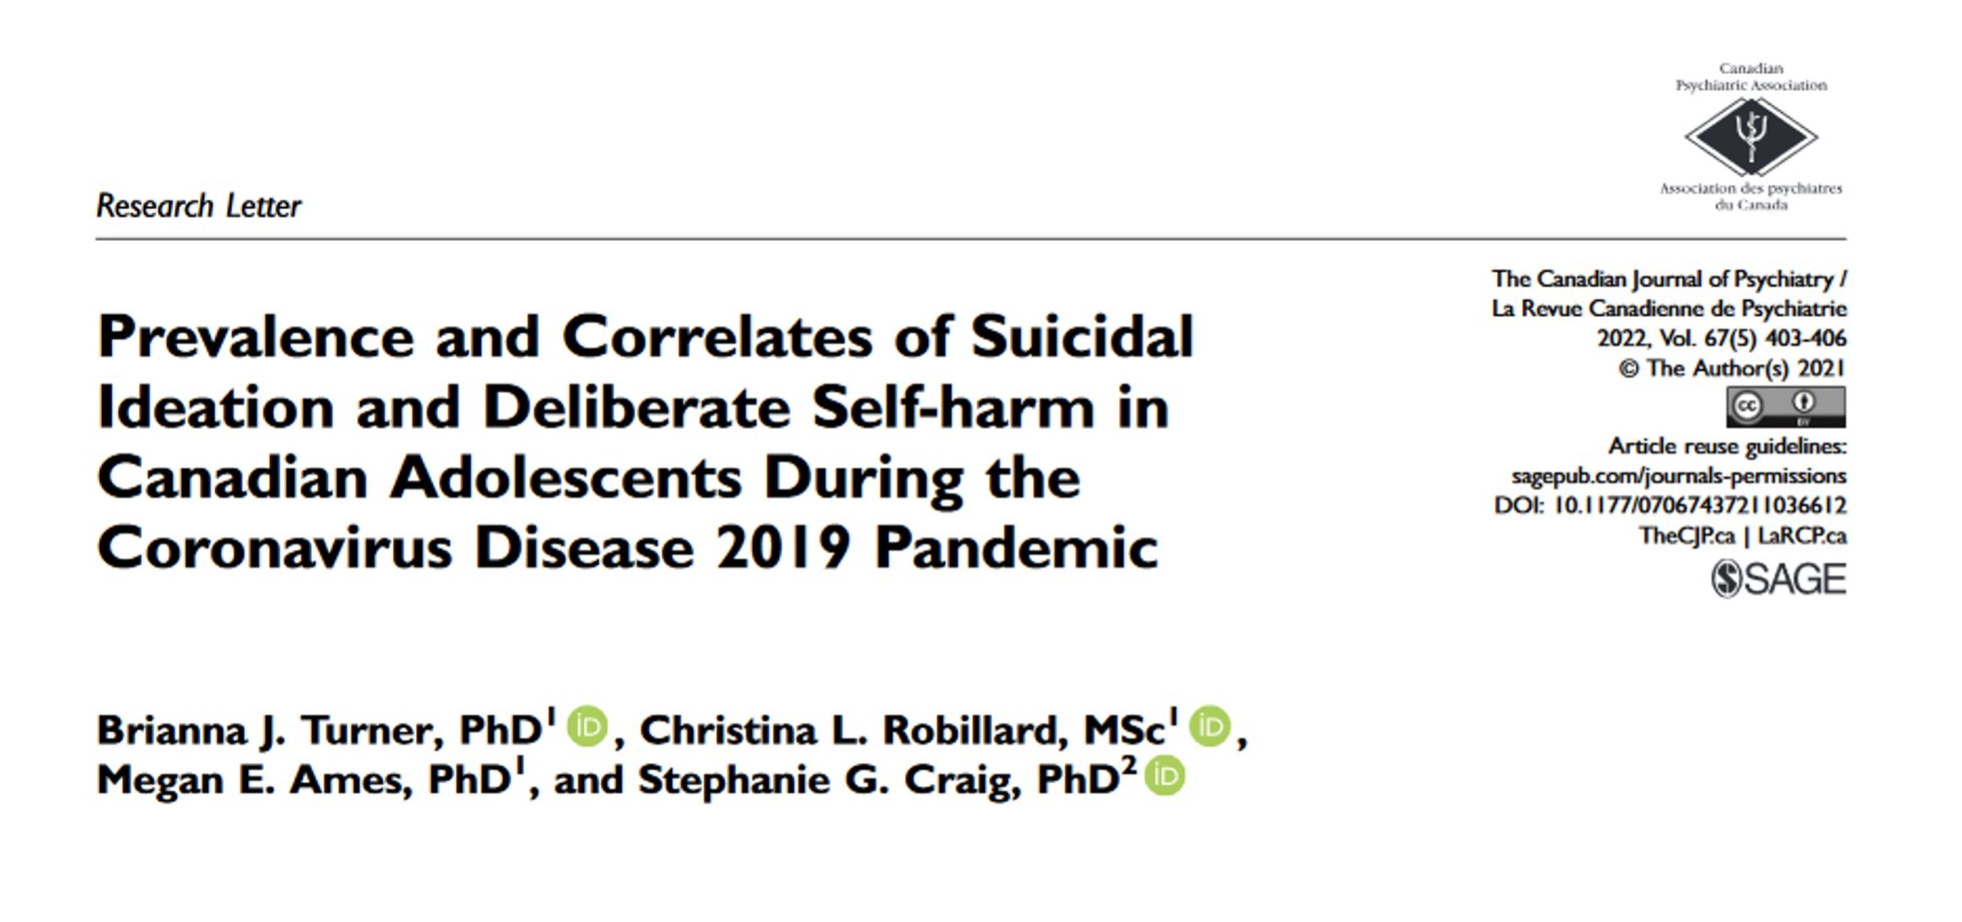 Prevalence and correlates of suicidal ideation and deliberate self harm